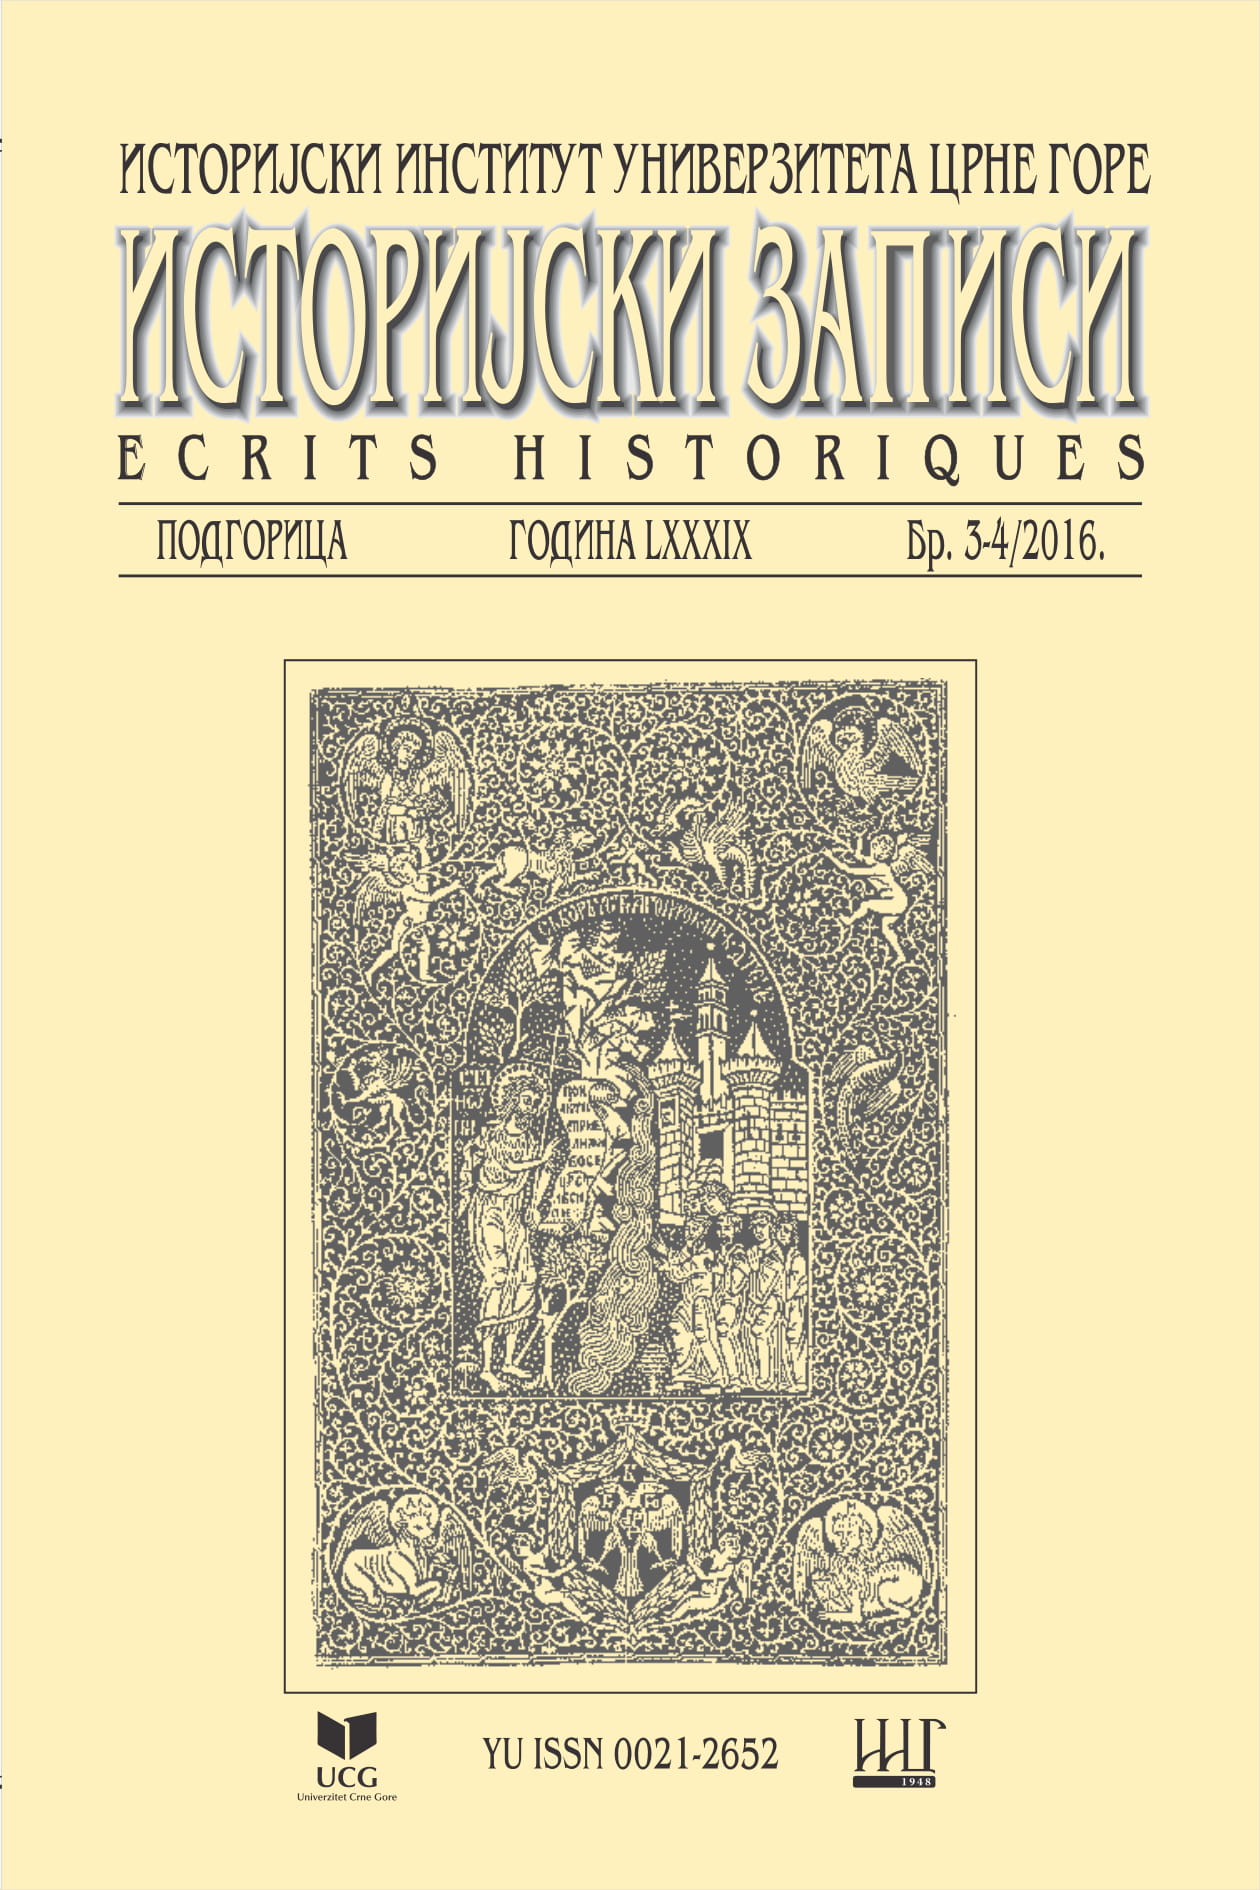 Adriatic Sea , routes and ports in Late Antiquity
and Early Middle Ages according to the
hagiographic sources Cover Image